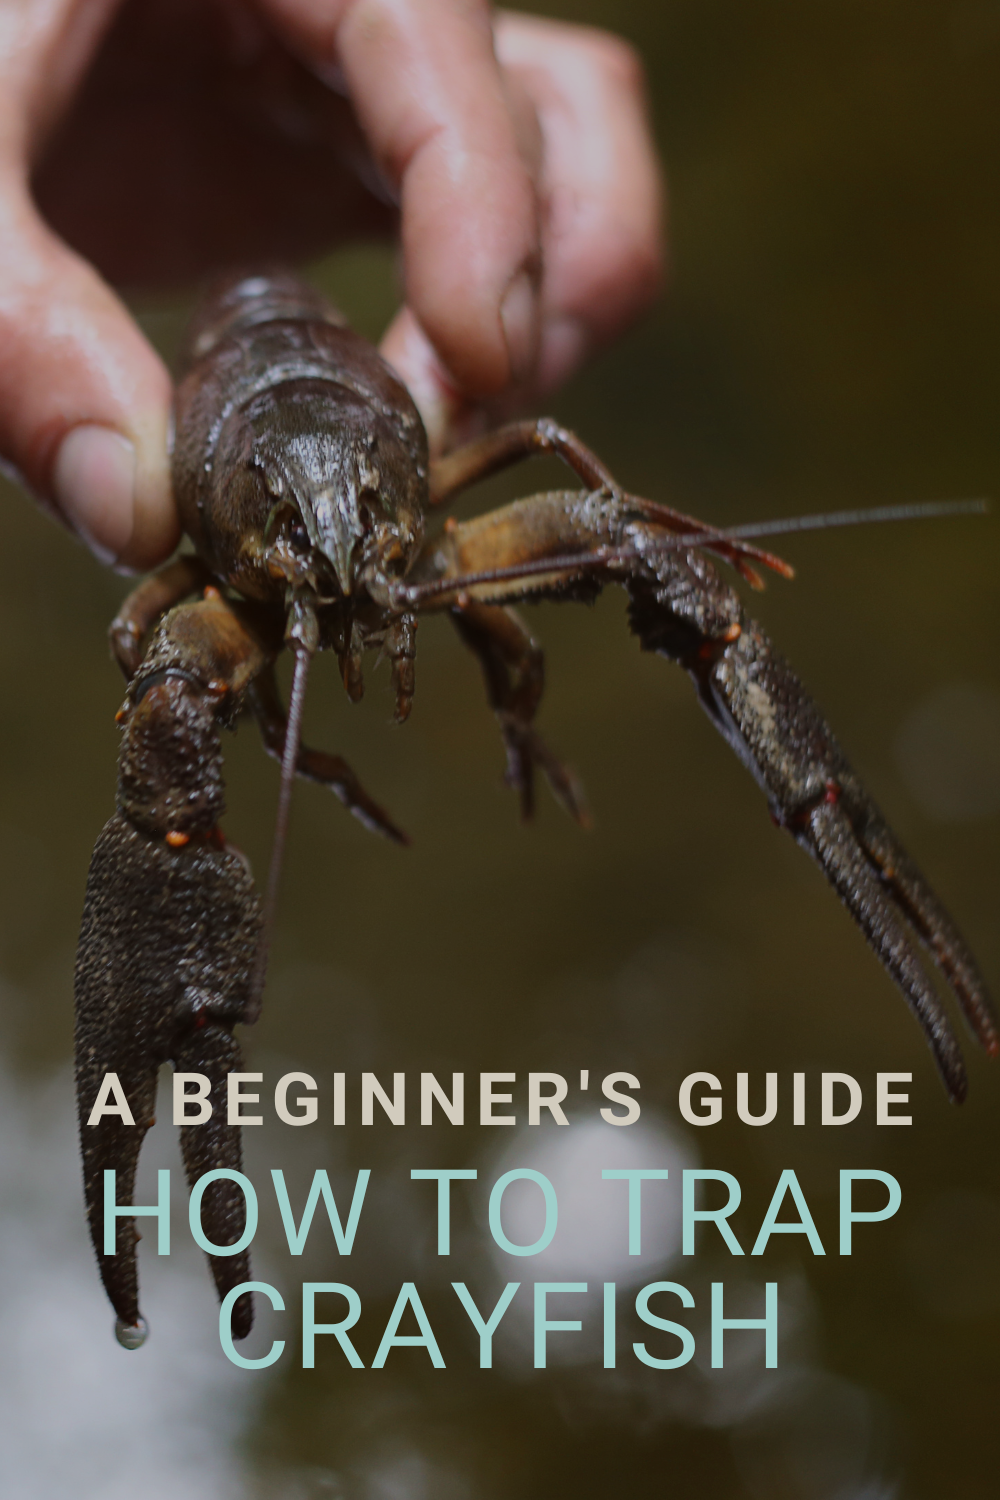 How to Trap Crayfish: A Beginner's Guide